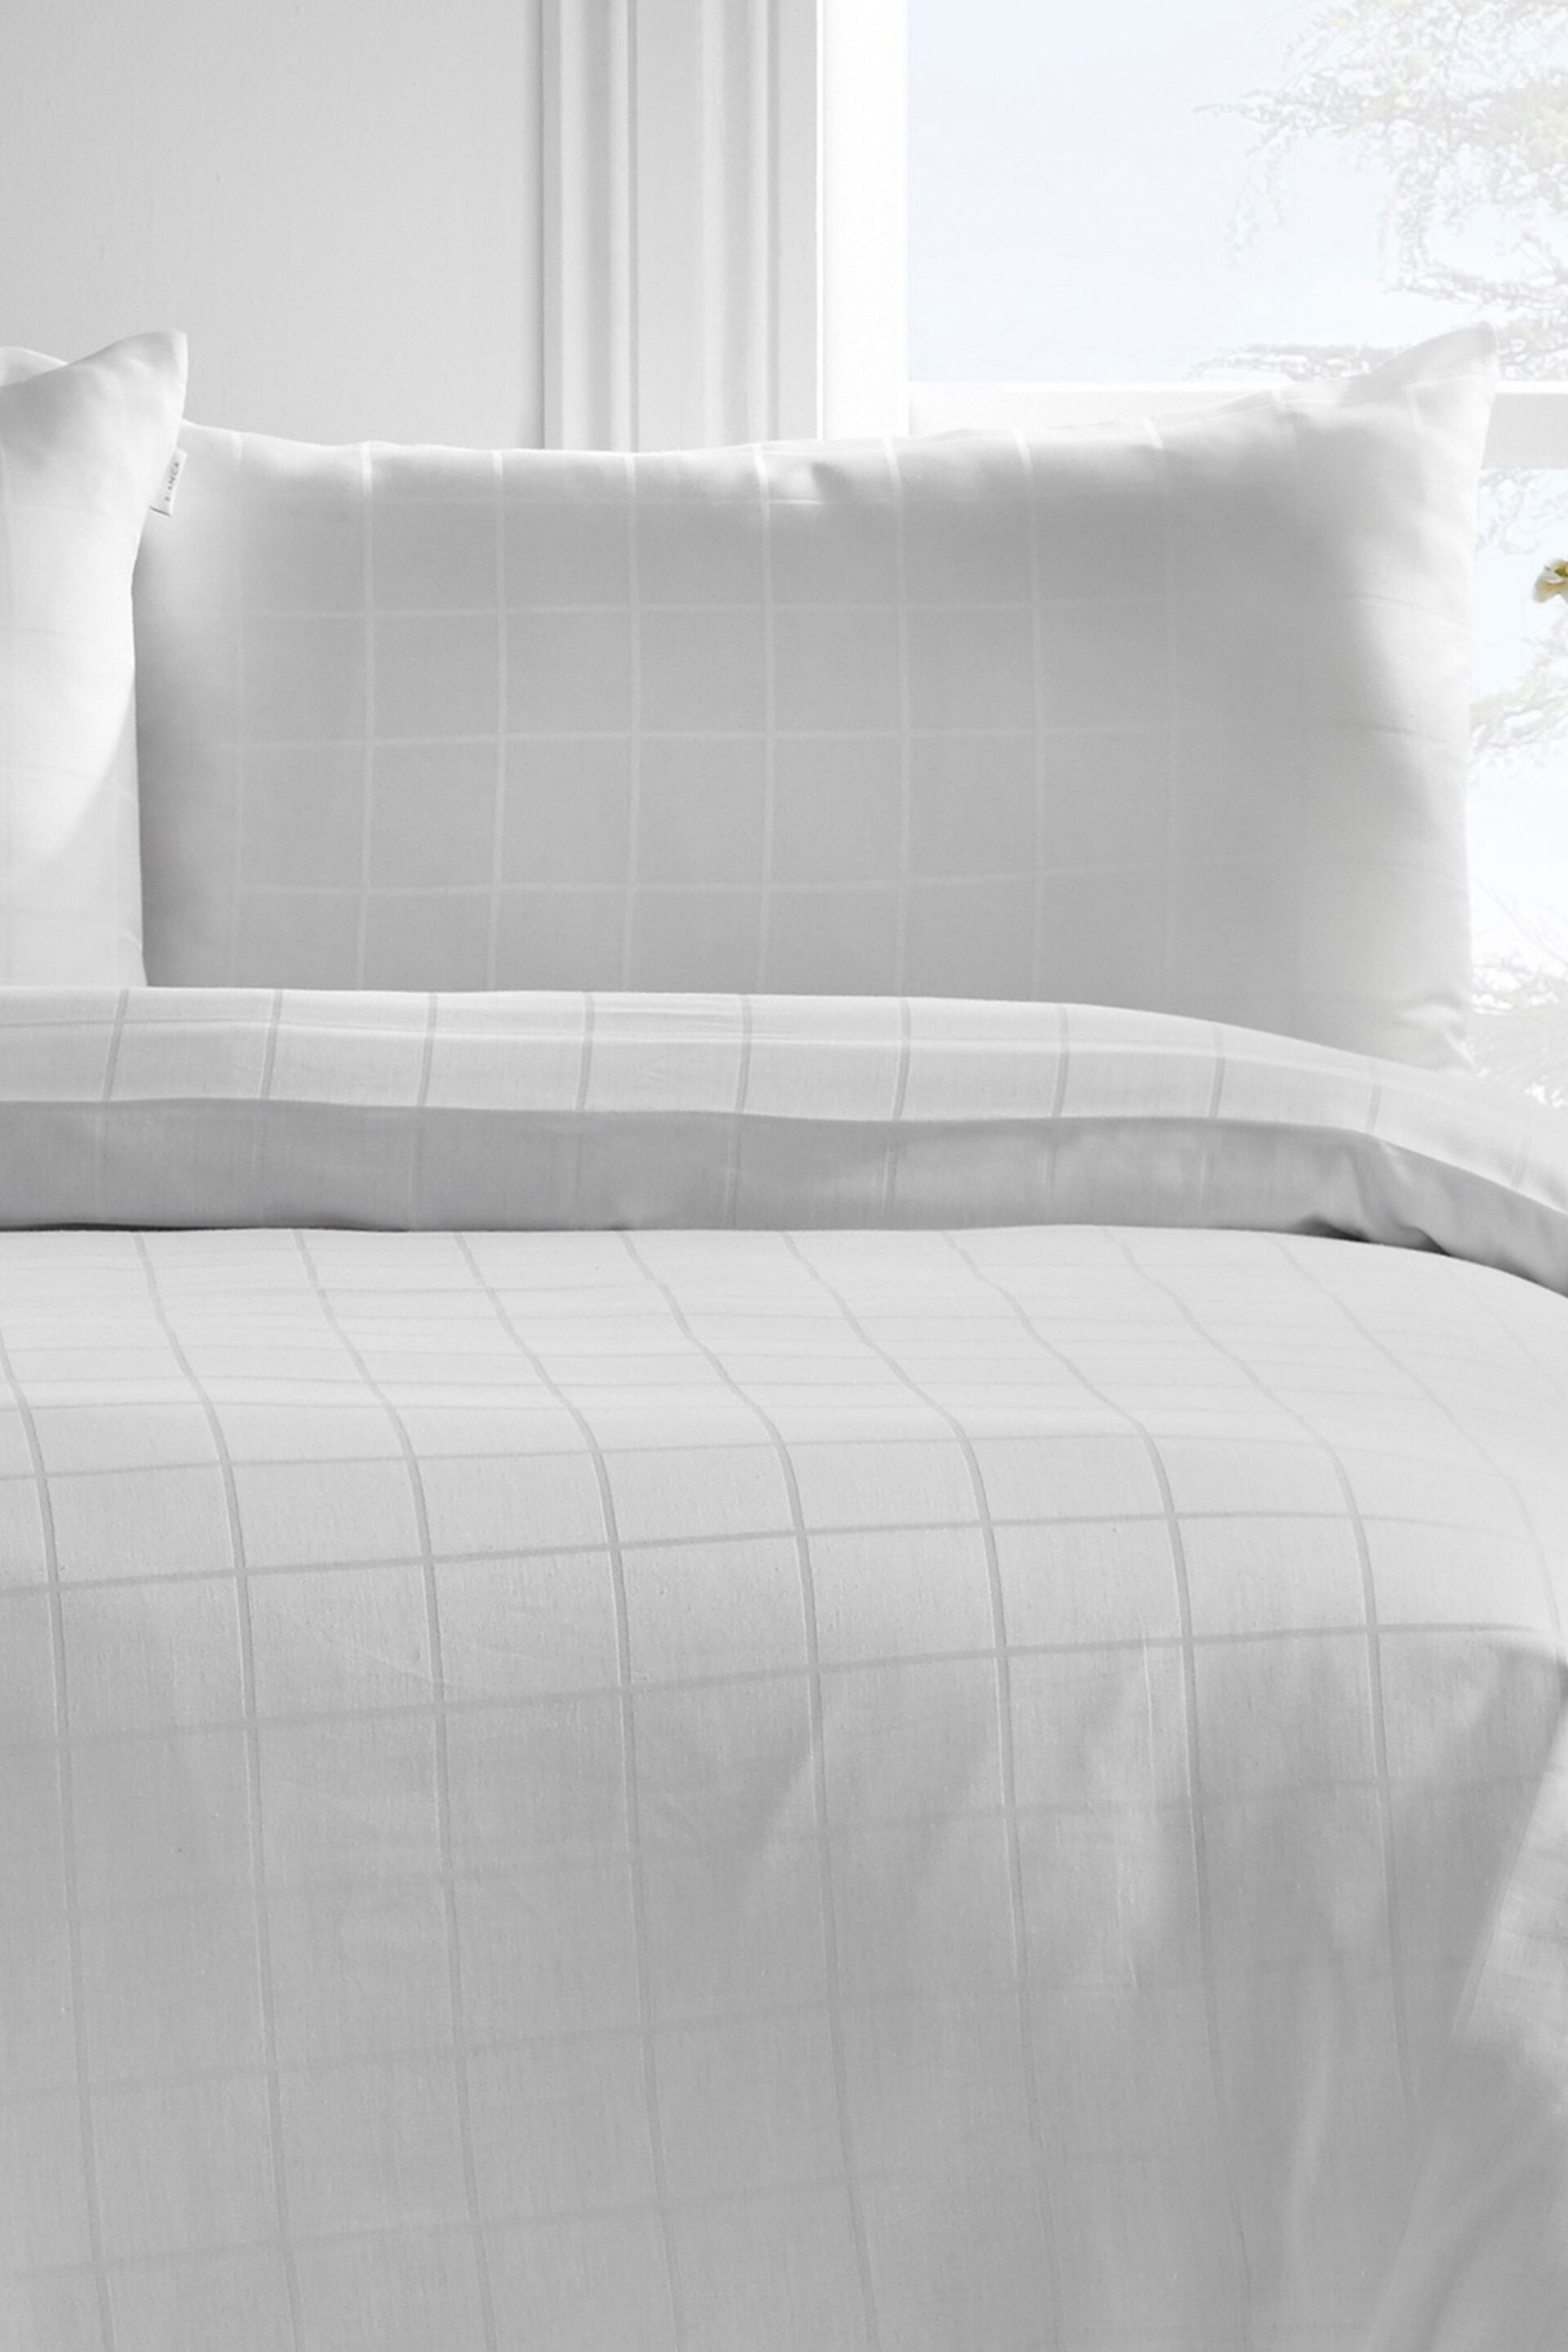 Catherine Lansfield White Woven Check 300 Thread Count Duvet Cover Set - Image 2 of 3